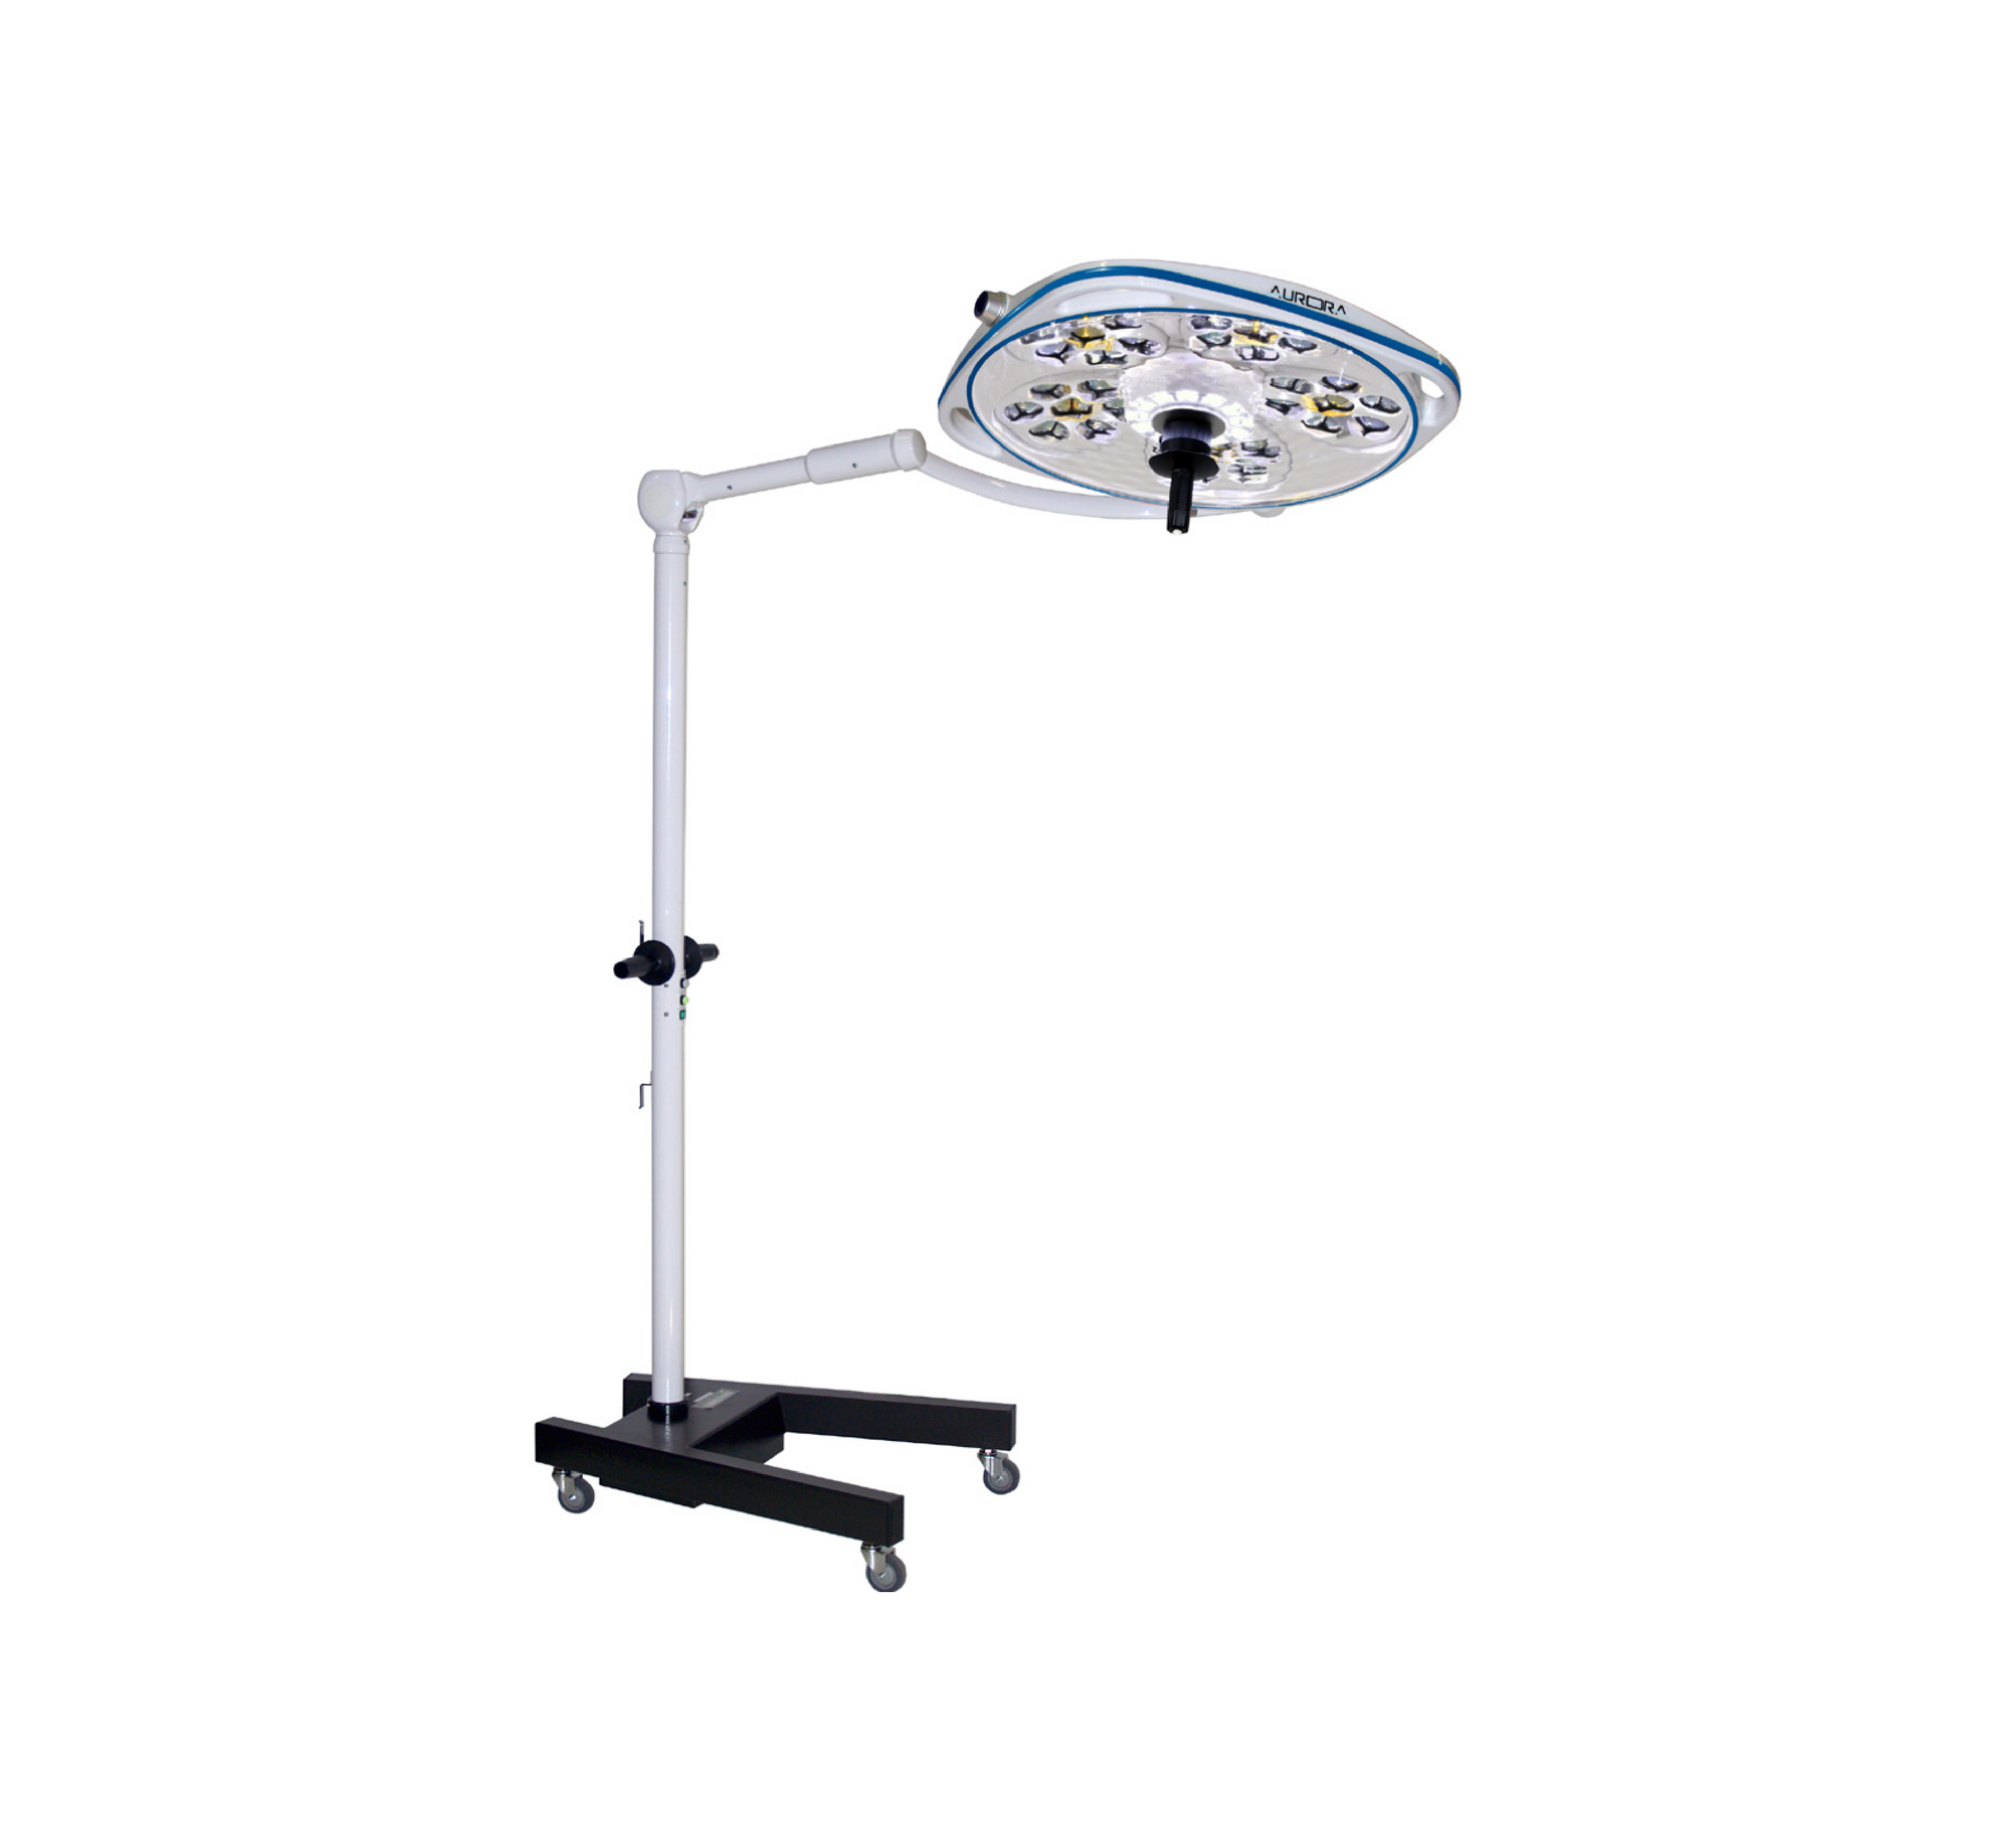 Single, Variable-Focus 24 Inch LED Surgical Lighting Fixture with Mobile Stand